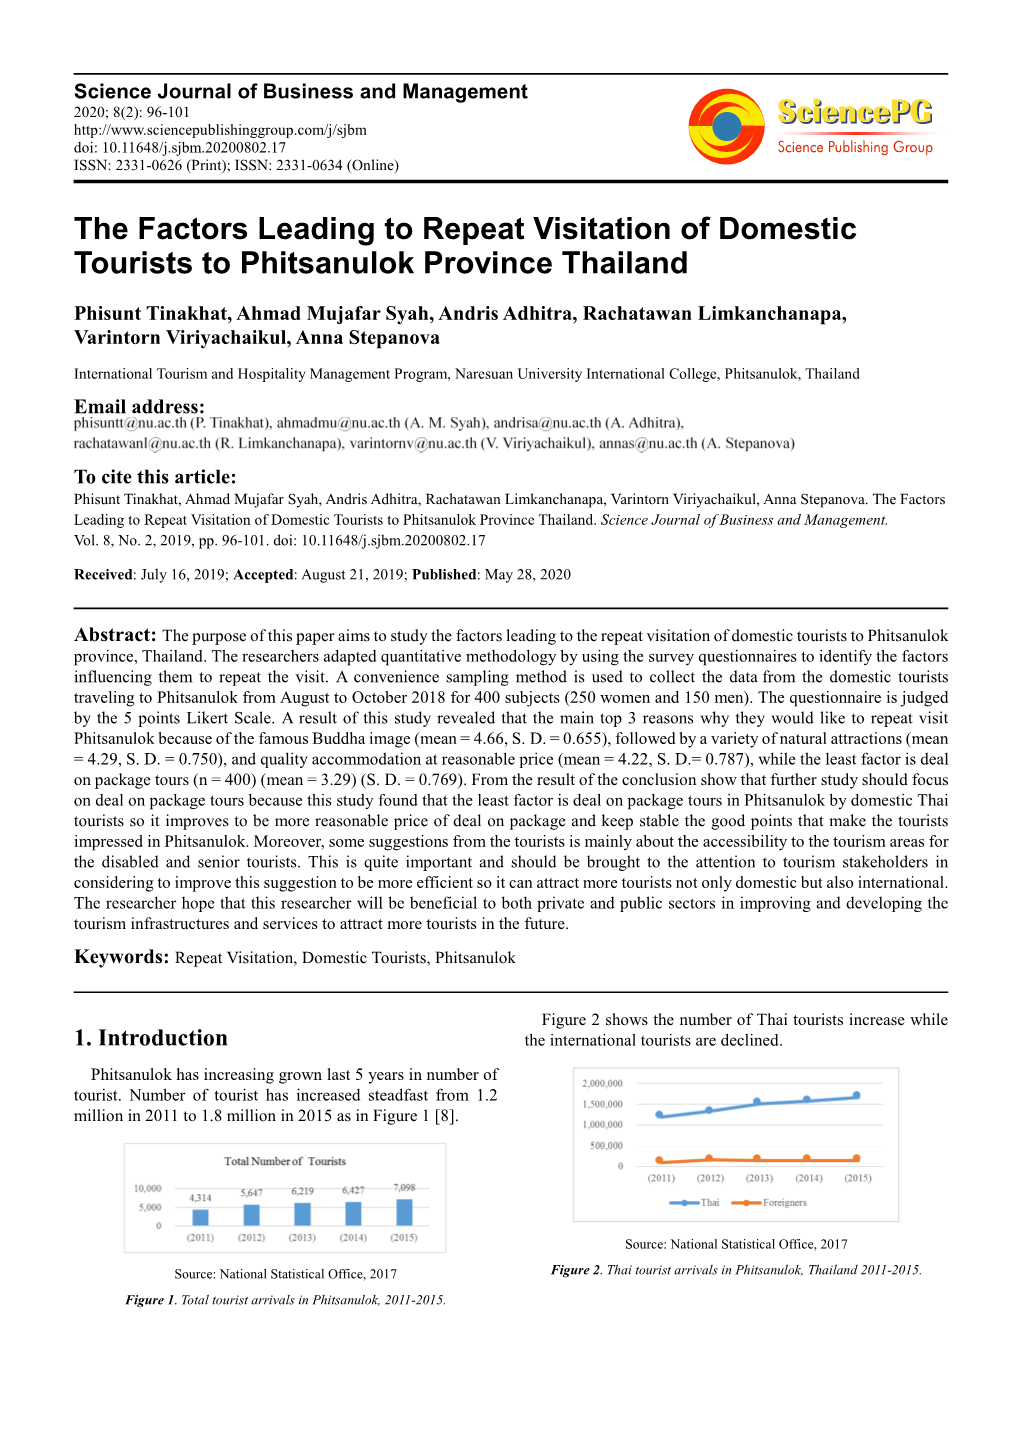 The Factors Leading to Repeat Visitation of Domestic Tourists to Phitsanulok Province Thailand